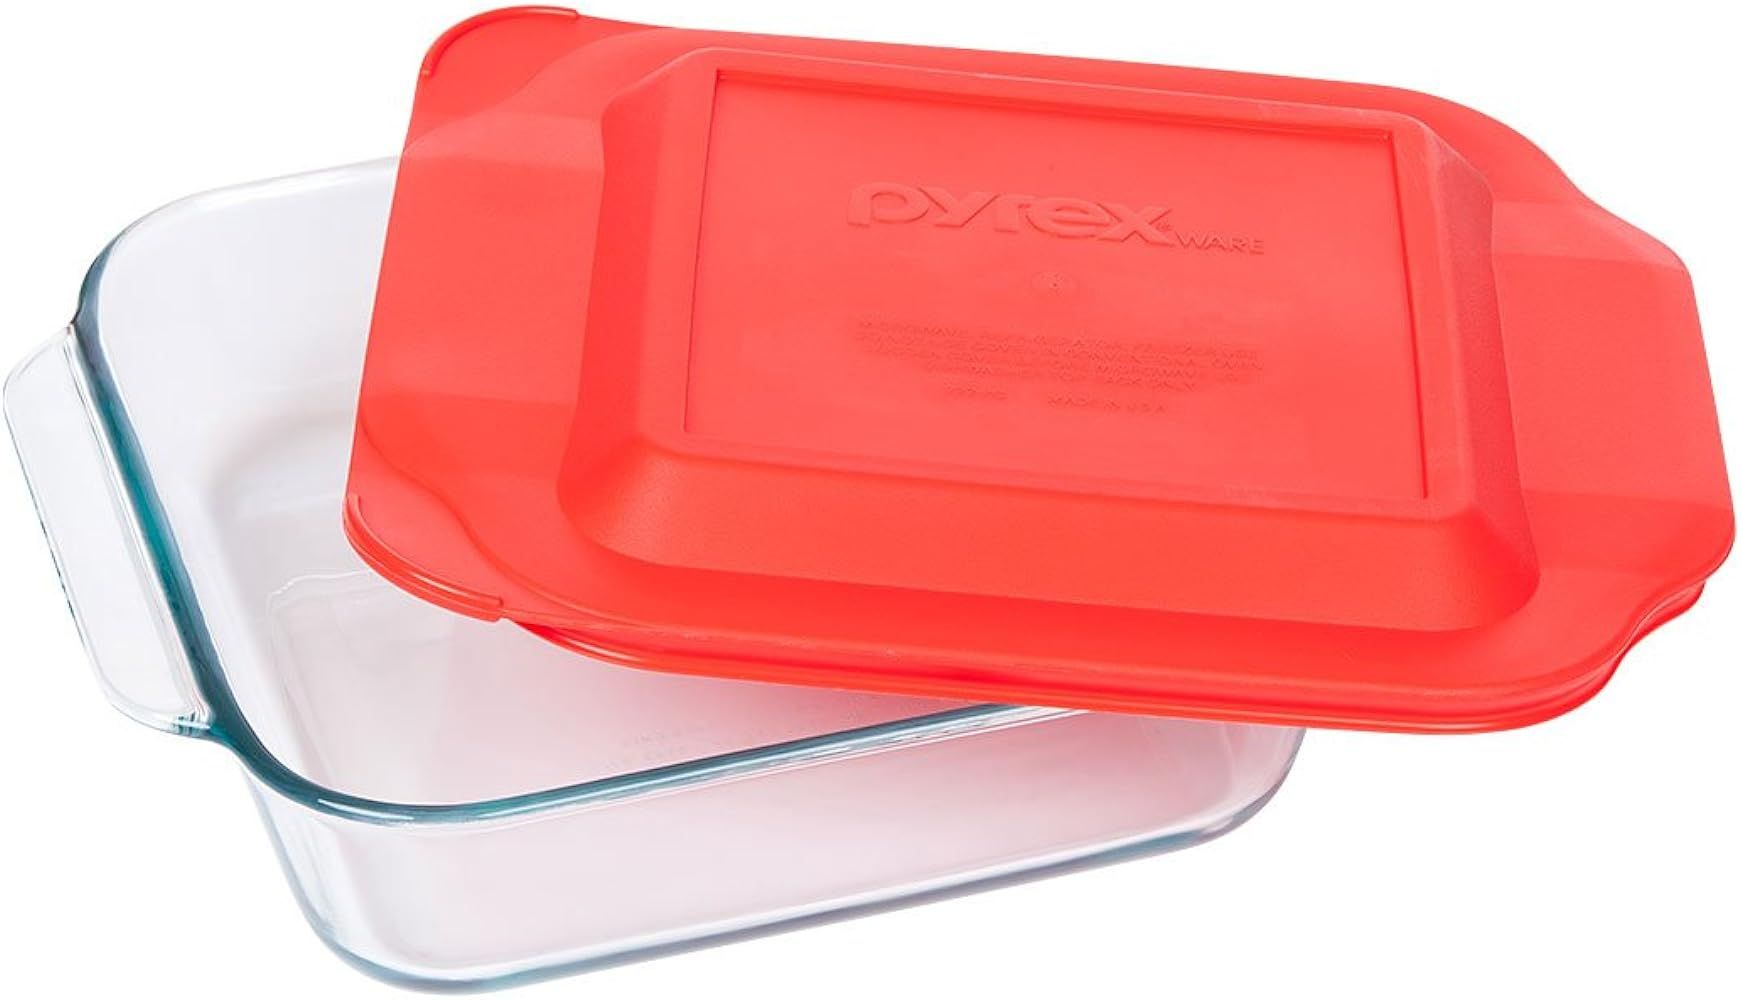 Pyrex 8 Inch Baking Dish, Red, 8-inches Square | Amazon (US)